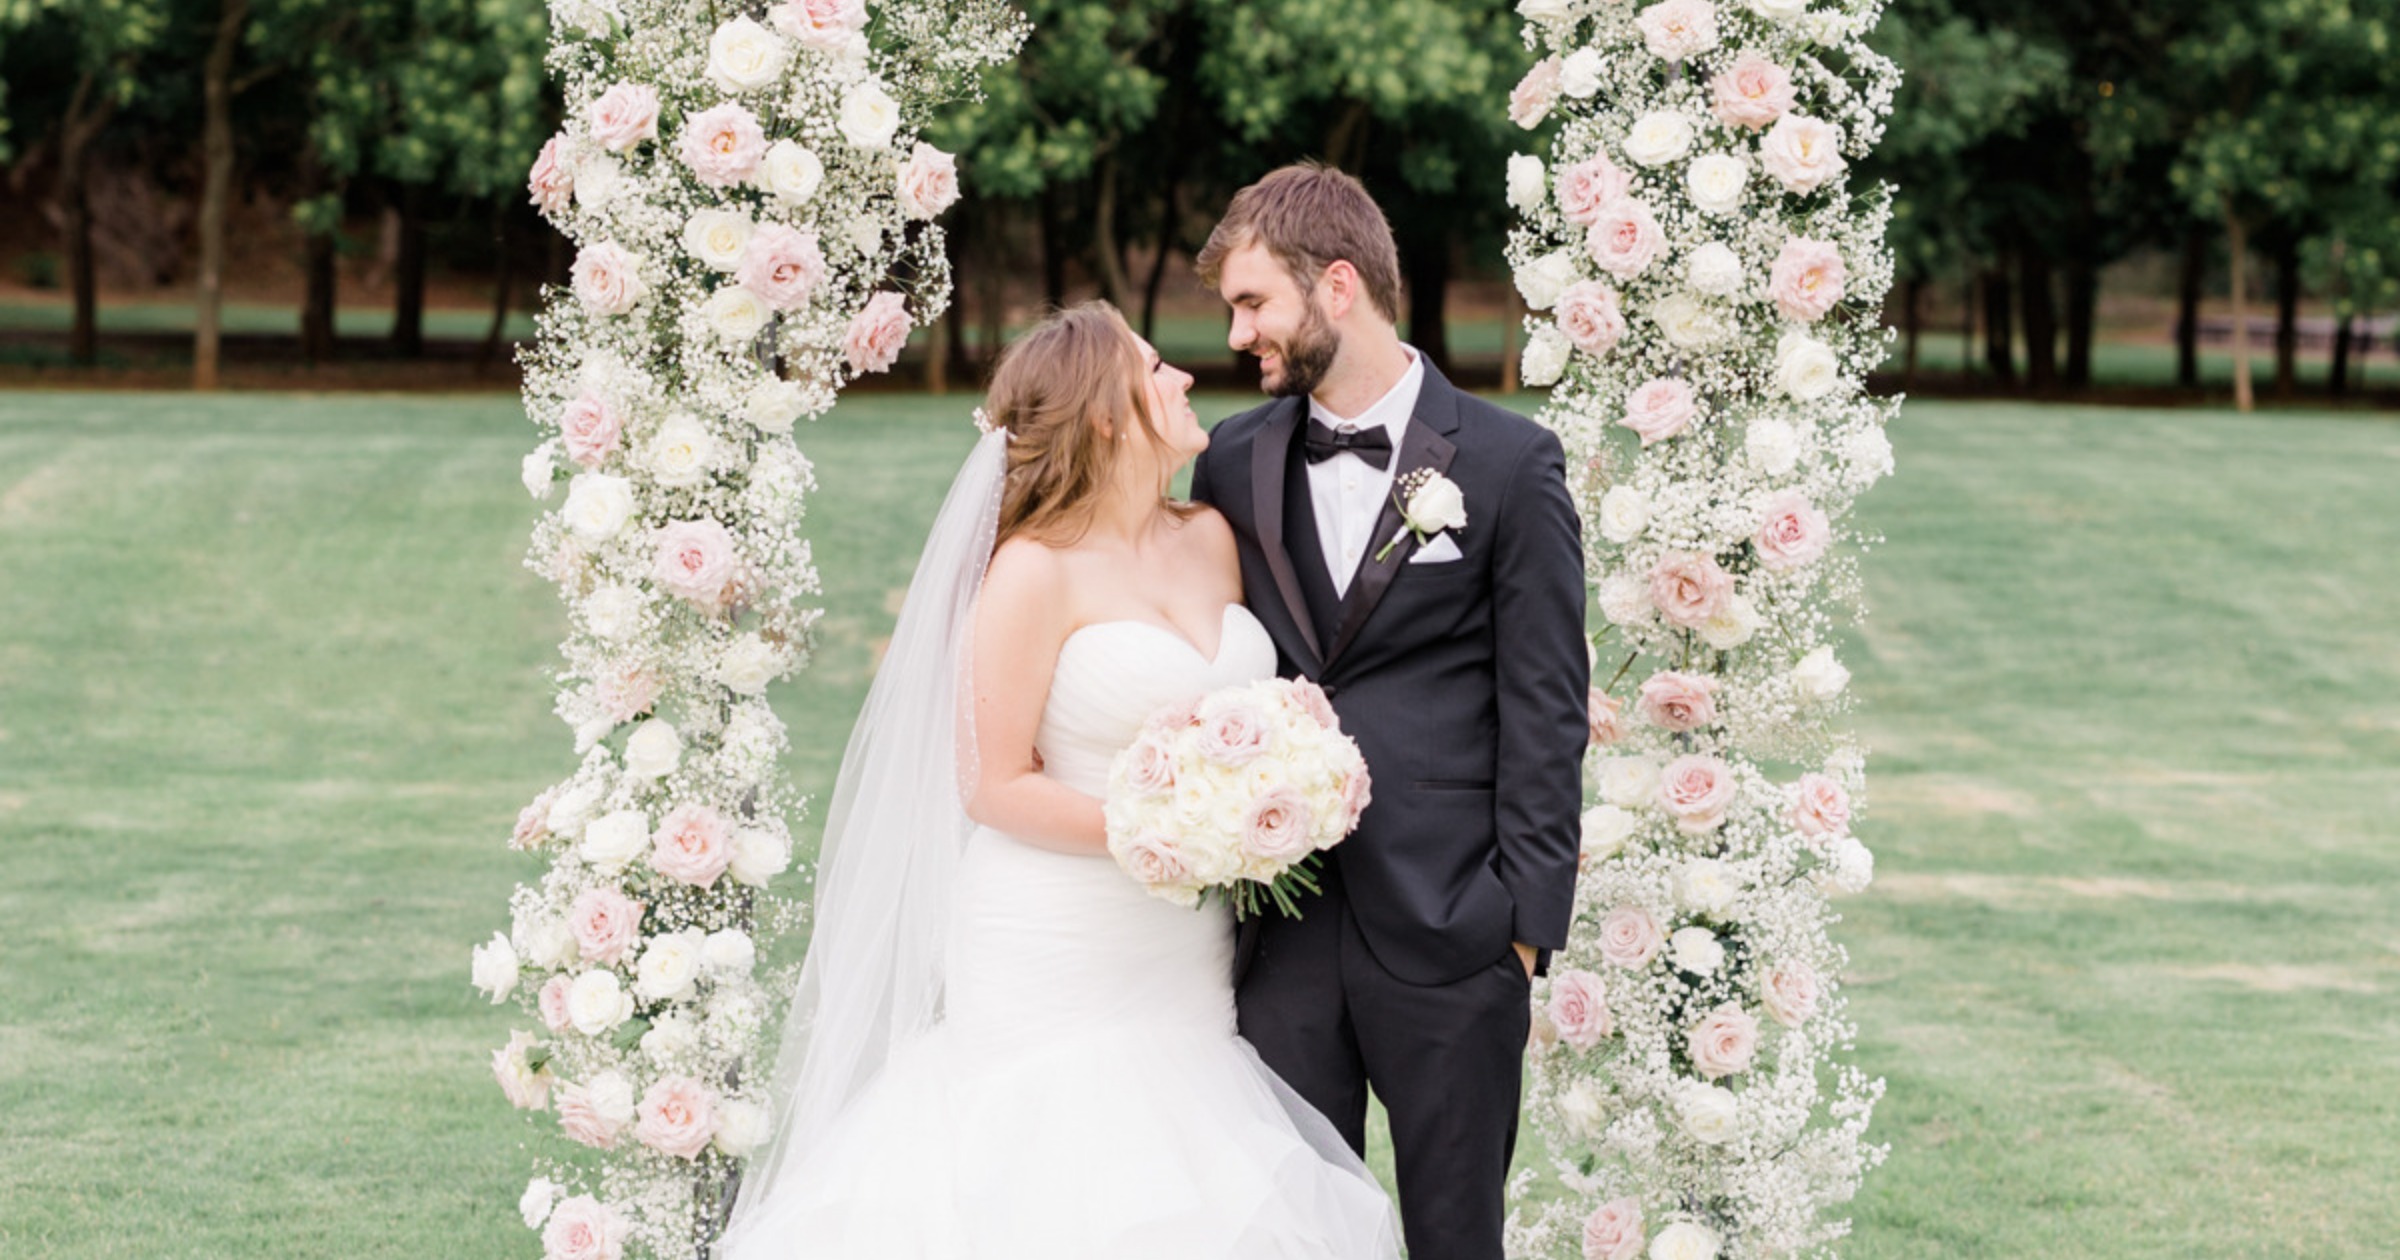 This Oklahoma Wedding Was Pretty in Pastels